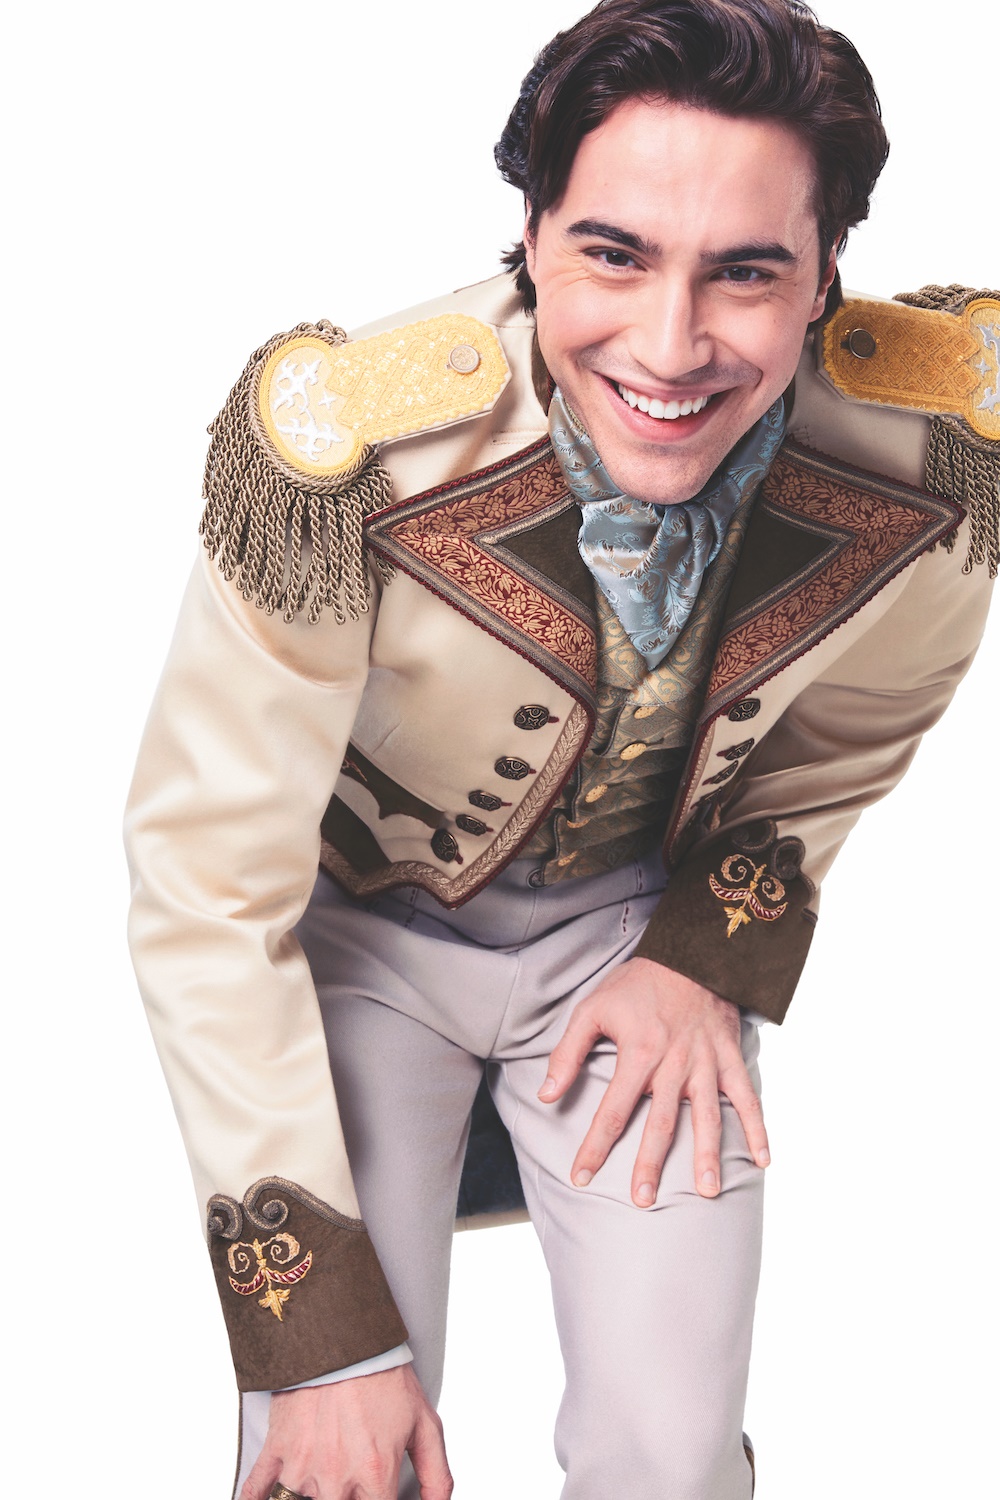 Disney's Frozen North American Tour Welcomes Back Ryan McCartan as “Hans”  for a Limited Run Beginning in Houston on July 12, Houston Style Magazine